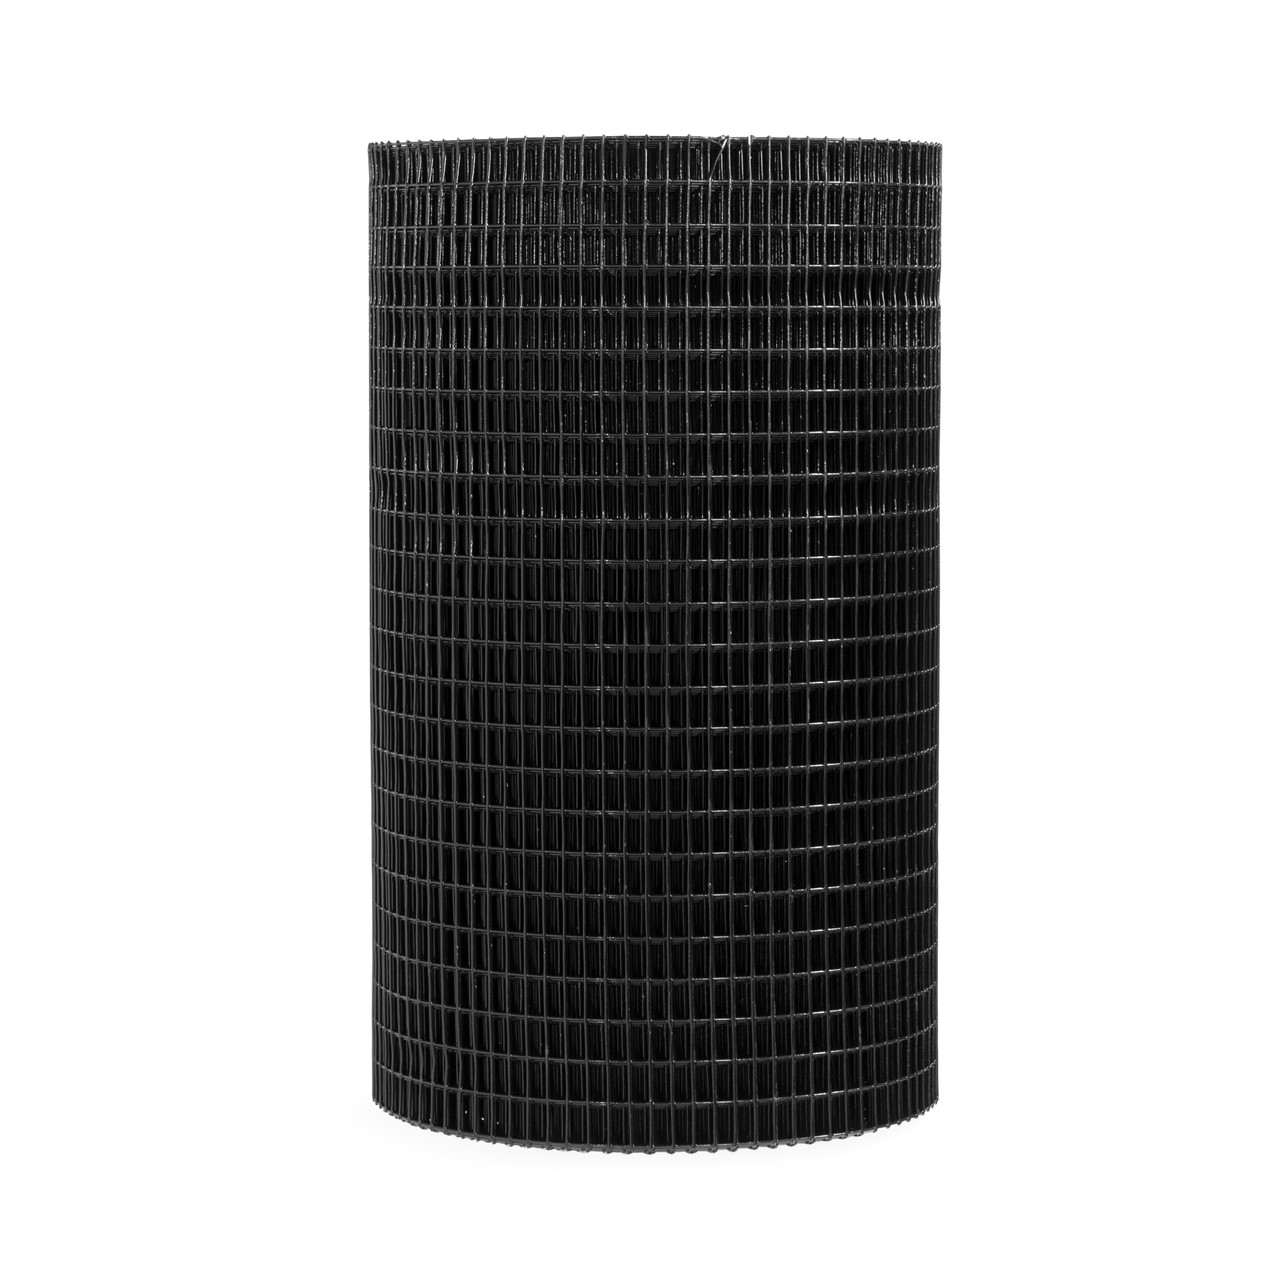 16 Gauge Black Vinyl Coated Welded Wire Mesh Size 0.5 inch by 1 inch -  FencerWire